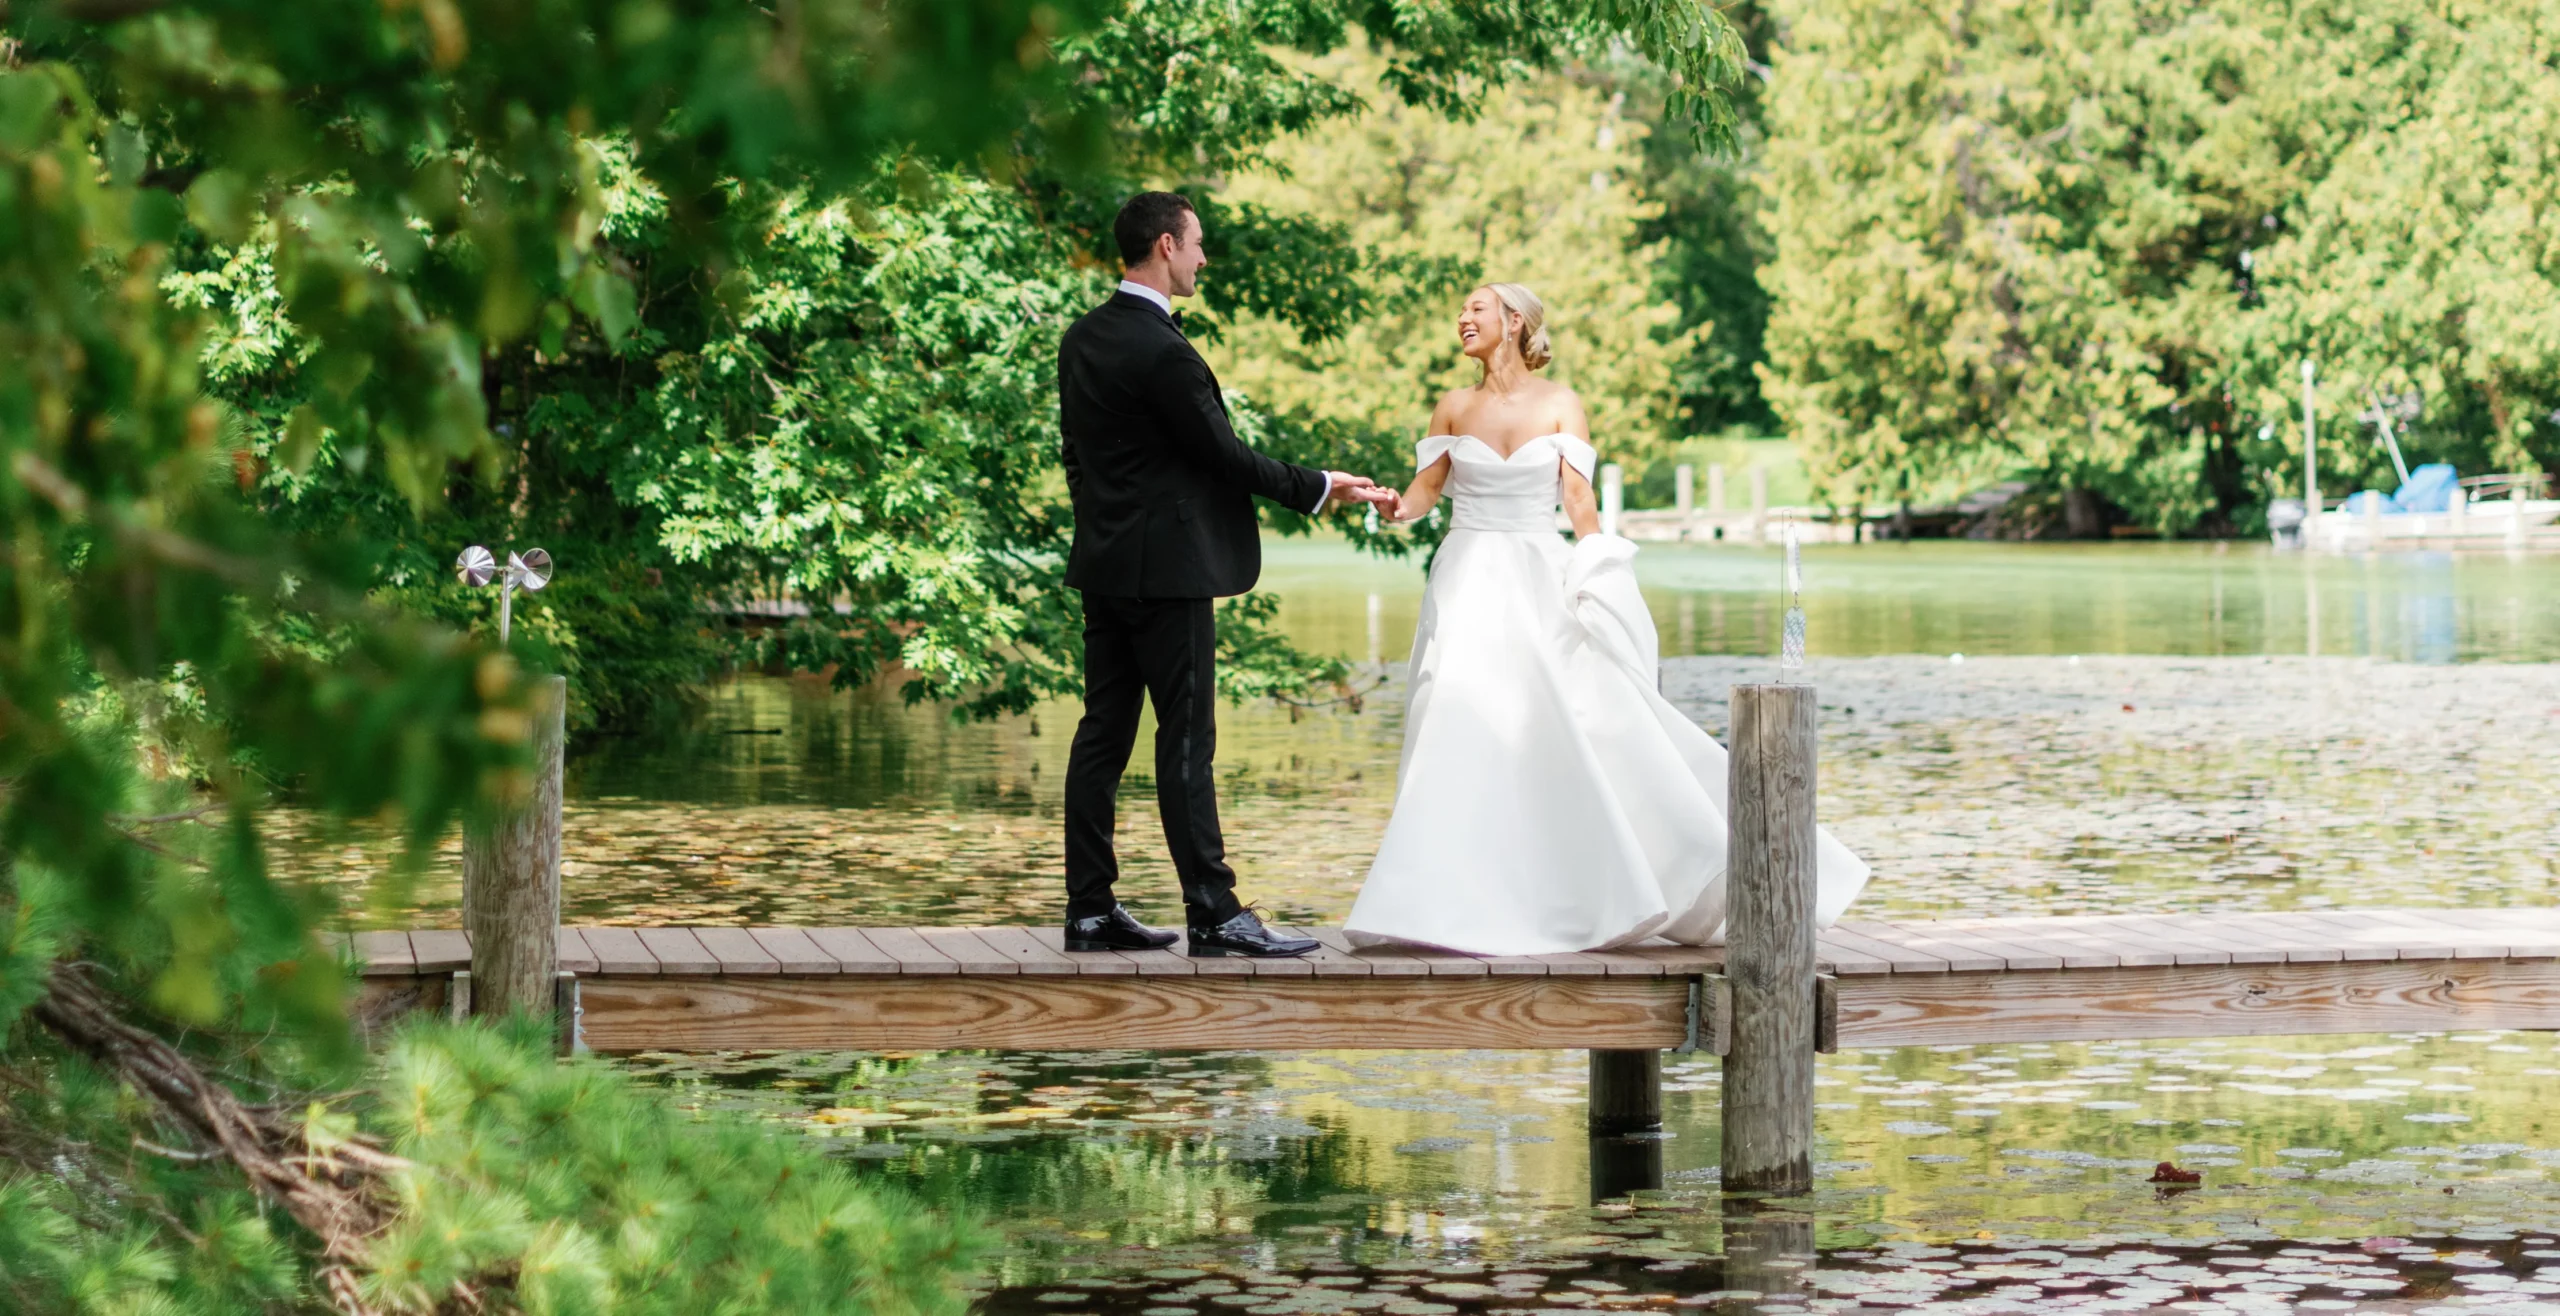 bride and groom holding hands on wooden dock on lake in wooded area